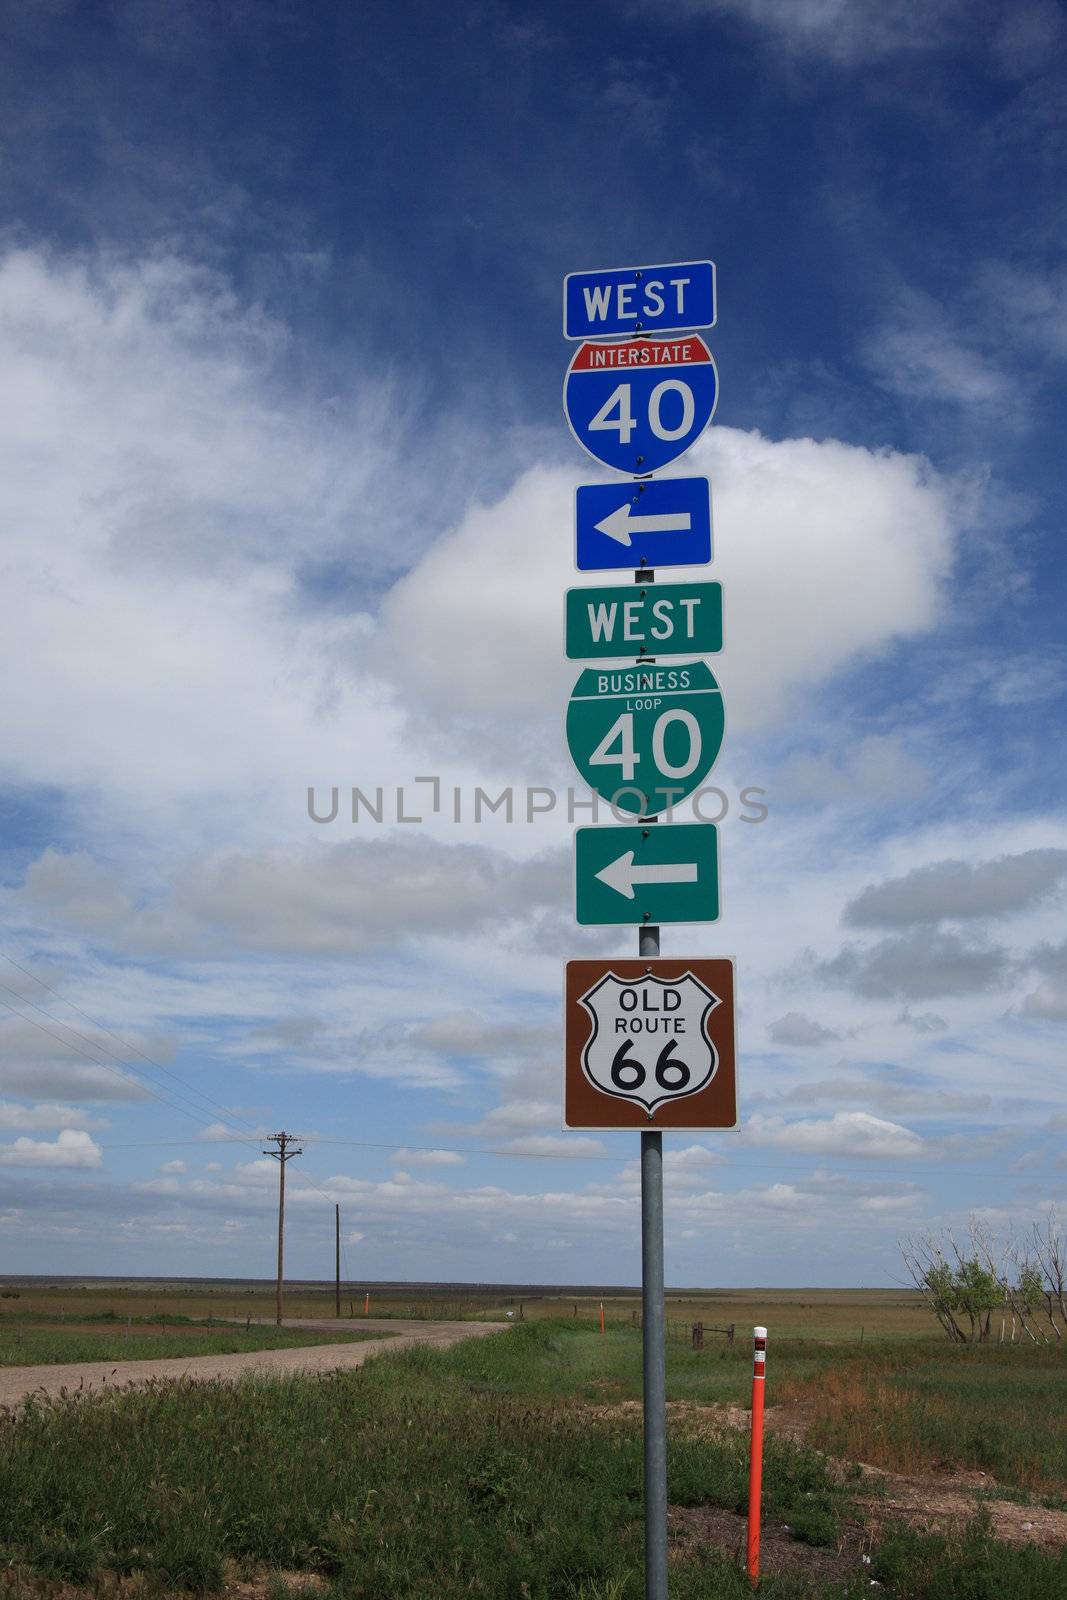 Route 66 Signage - Texas by Ffooter